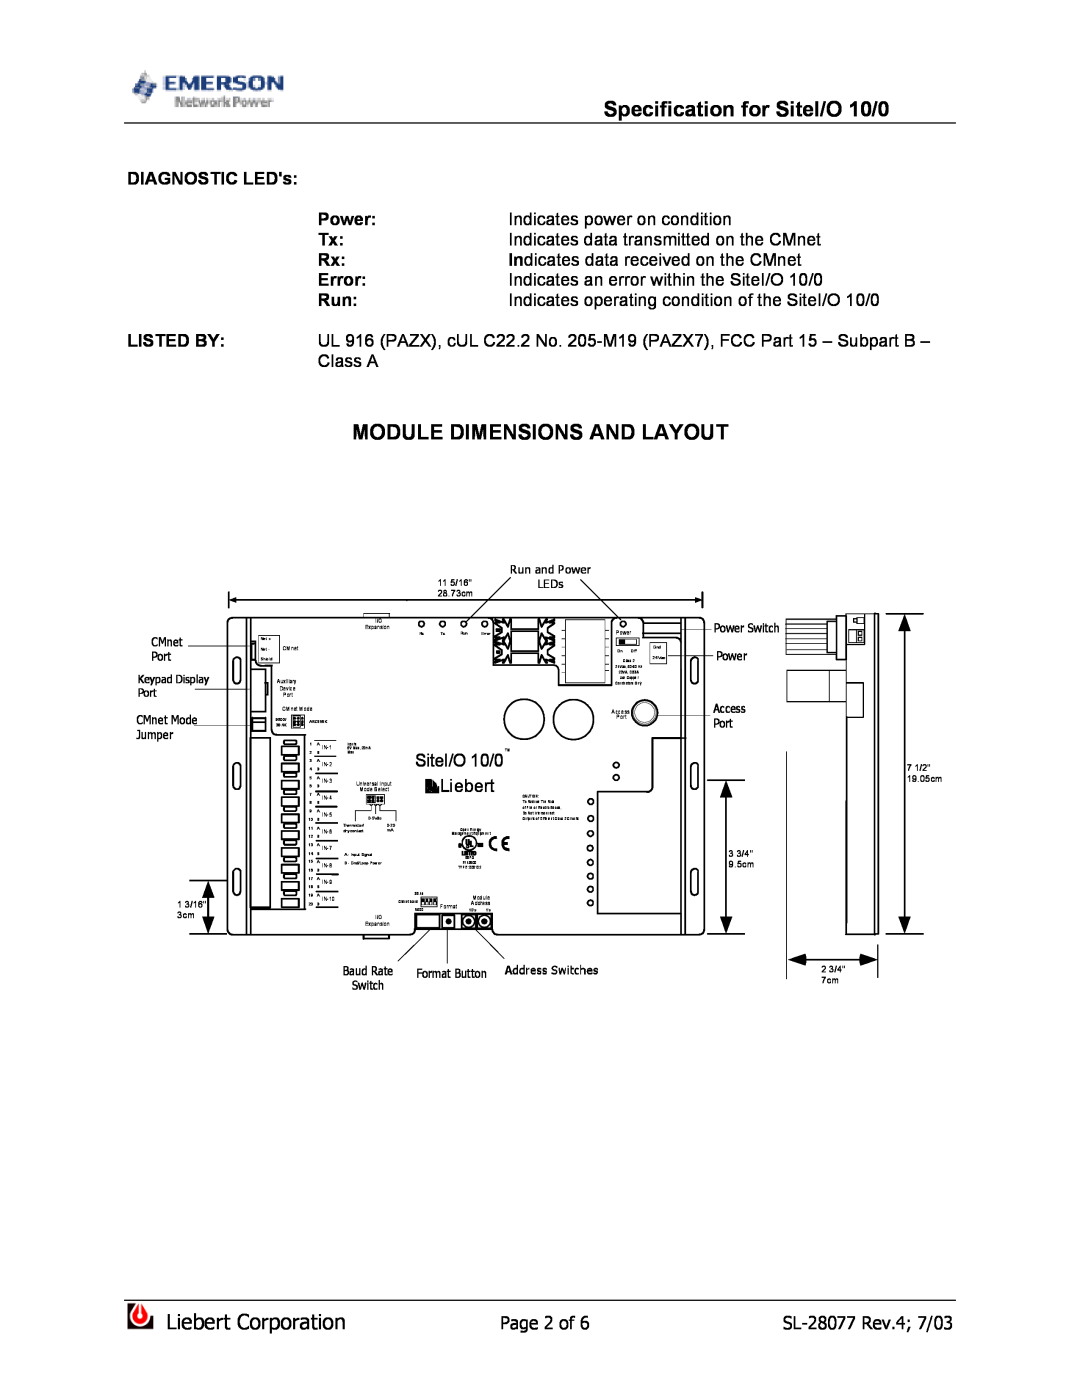 Emerson SiteI/O-Line dimensions Module Dimensions And Layout, Specification for SiteI/O 10/0, Liebert Corporation 